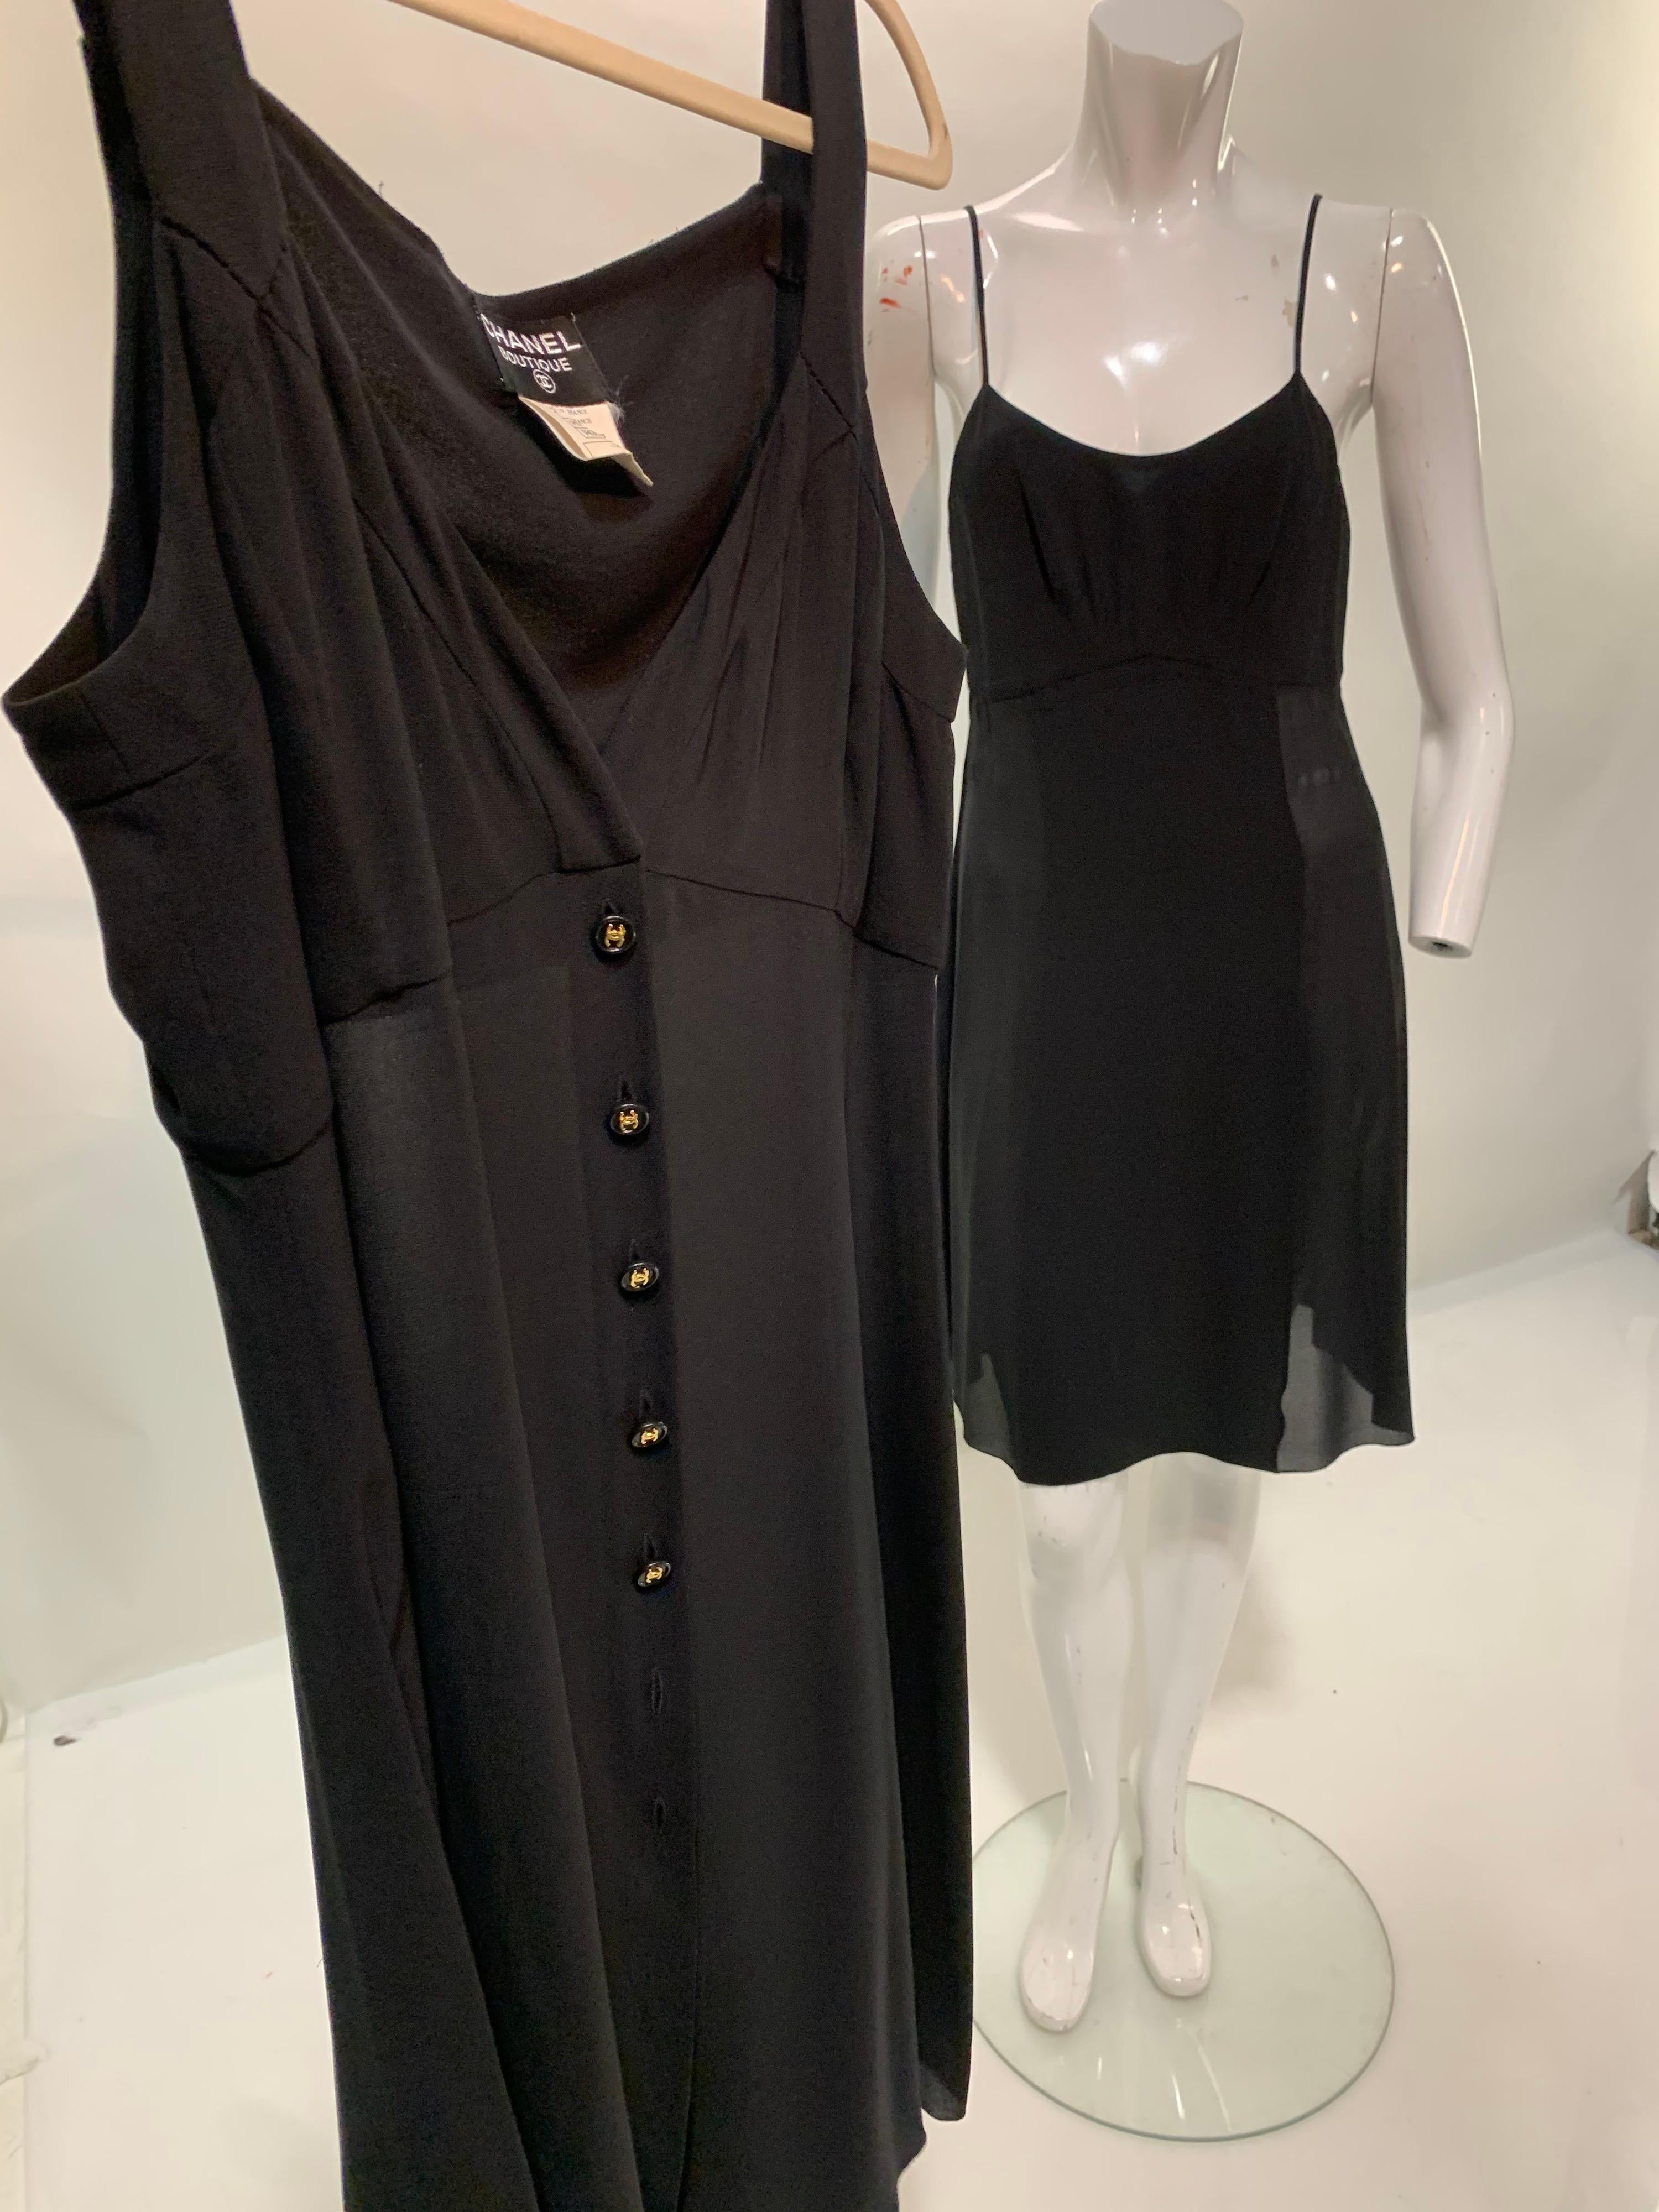 1997 Chanel by Lagerfeld Black 2-Piece Slip and Button Down Crepe Dress Ensemble 4